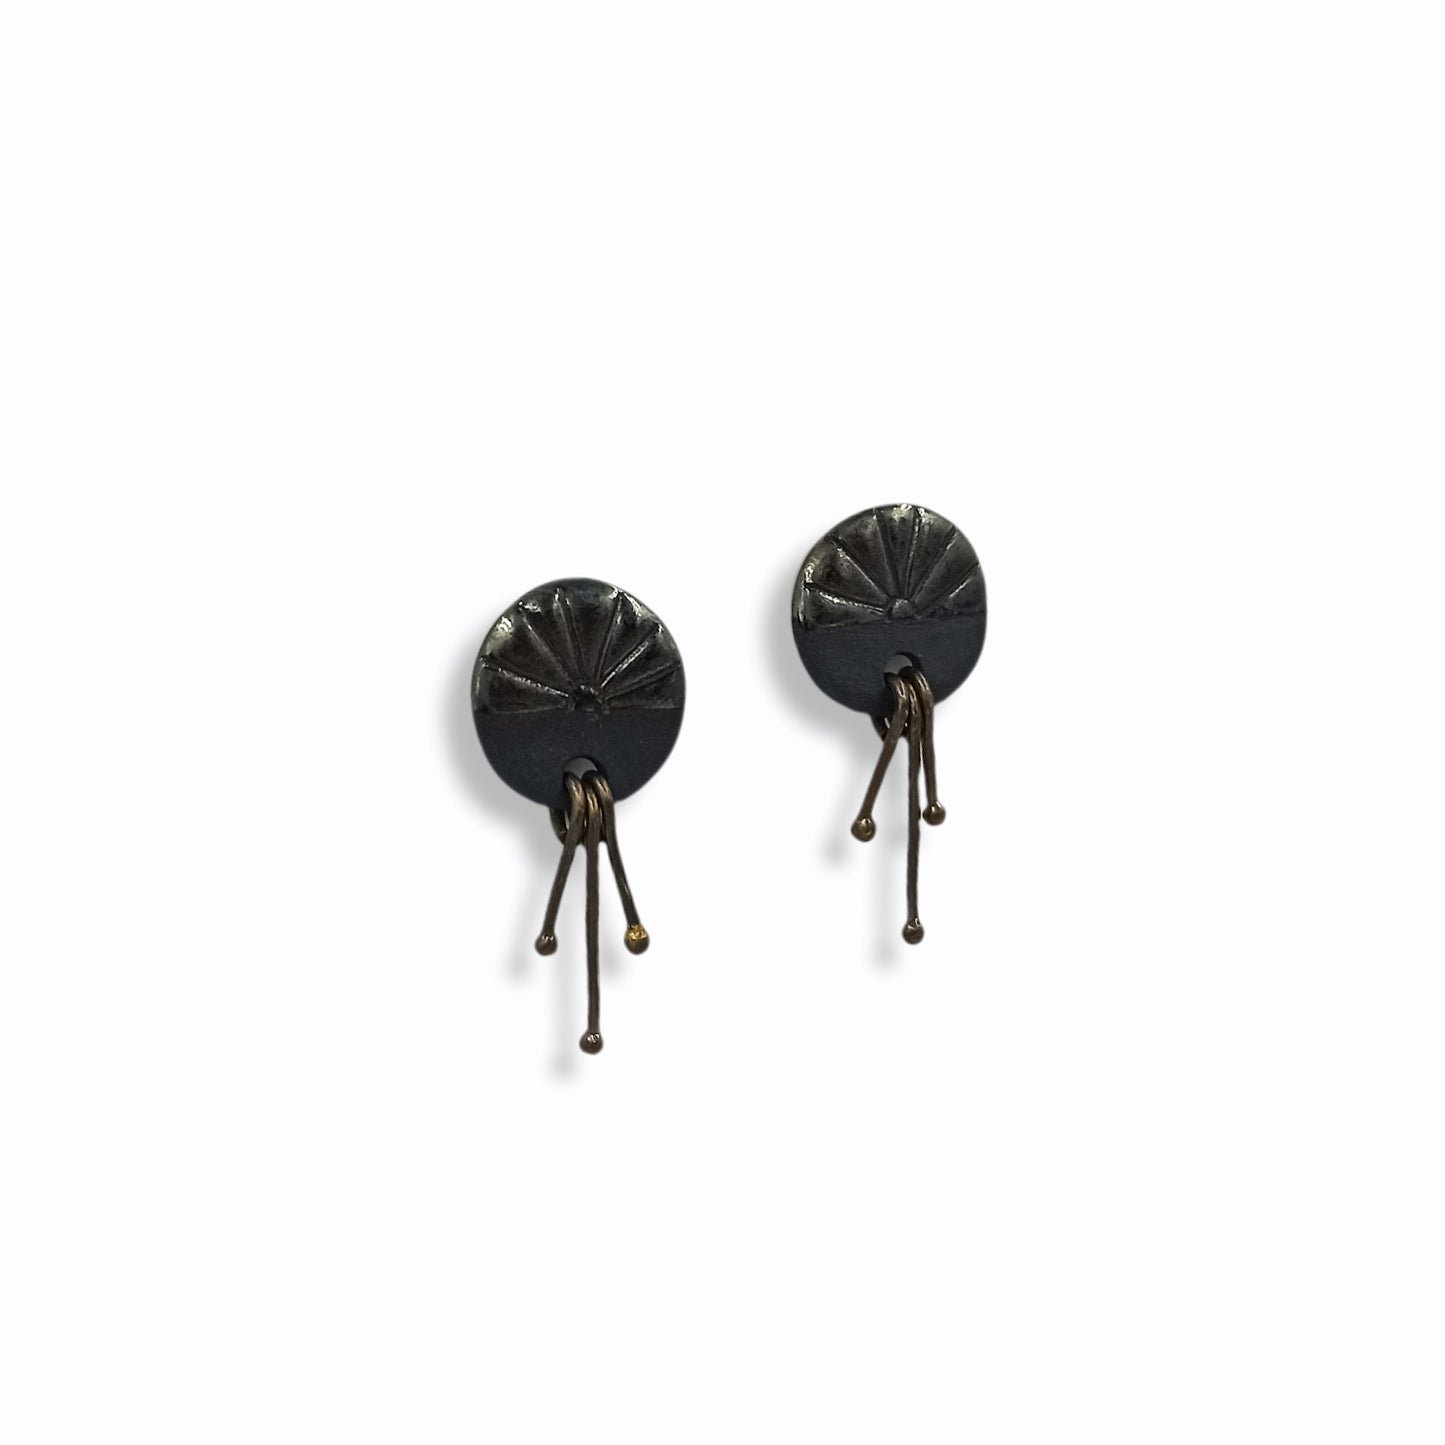 Handmade stud earrings from black porcelain with brass wires that hangs 